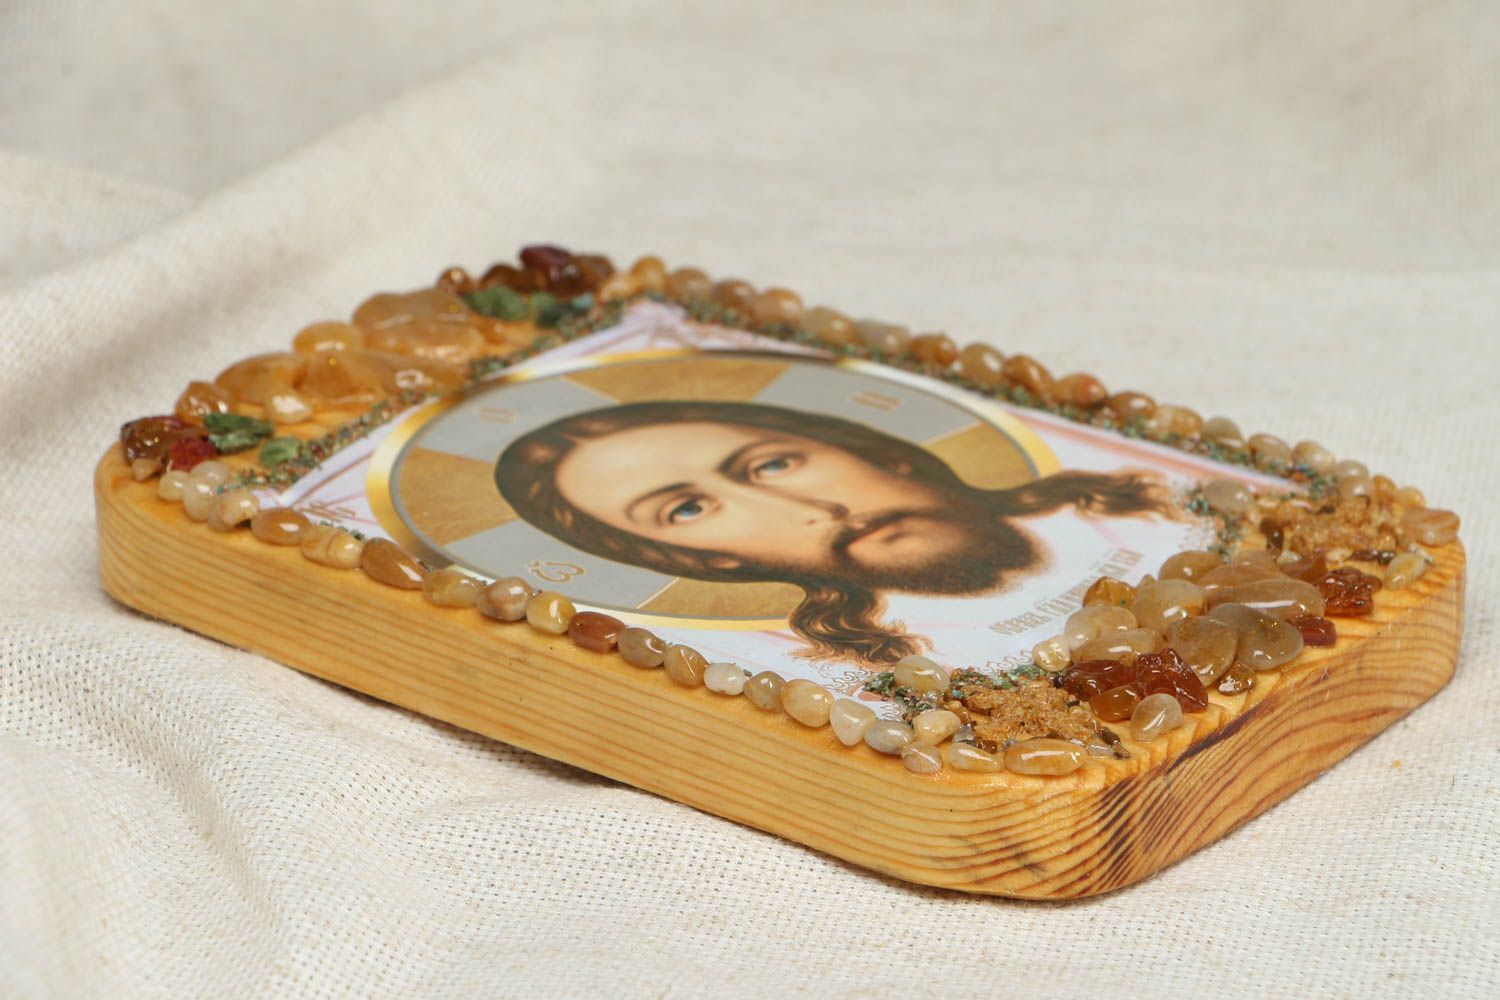 Jesus Christ icon made of wood and stones photo 3